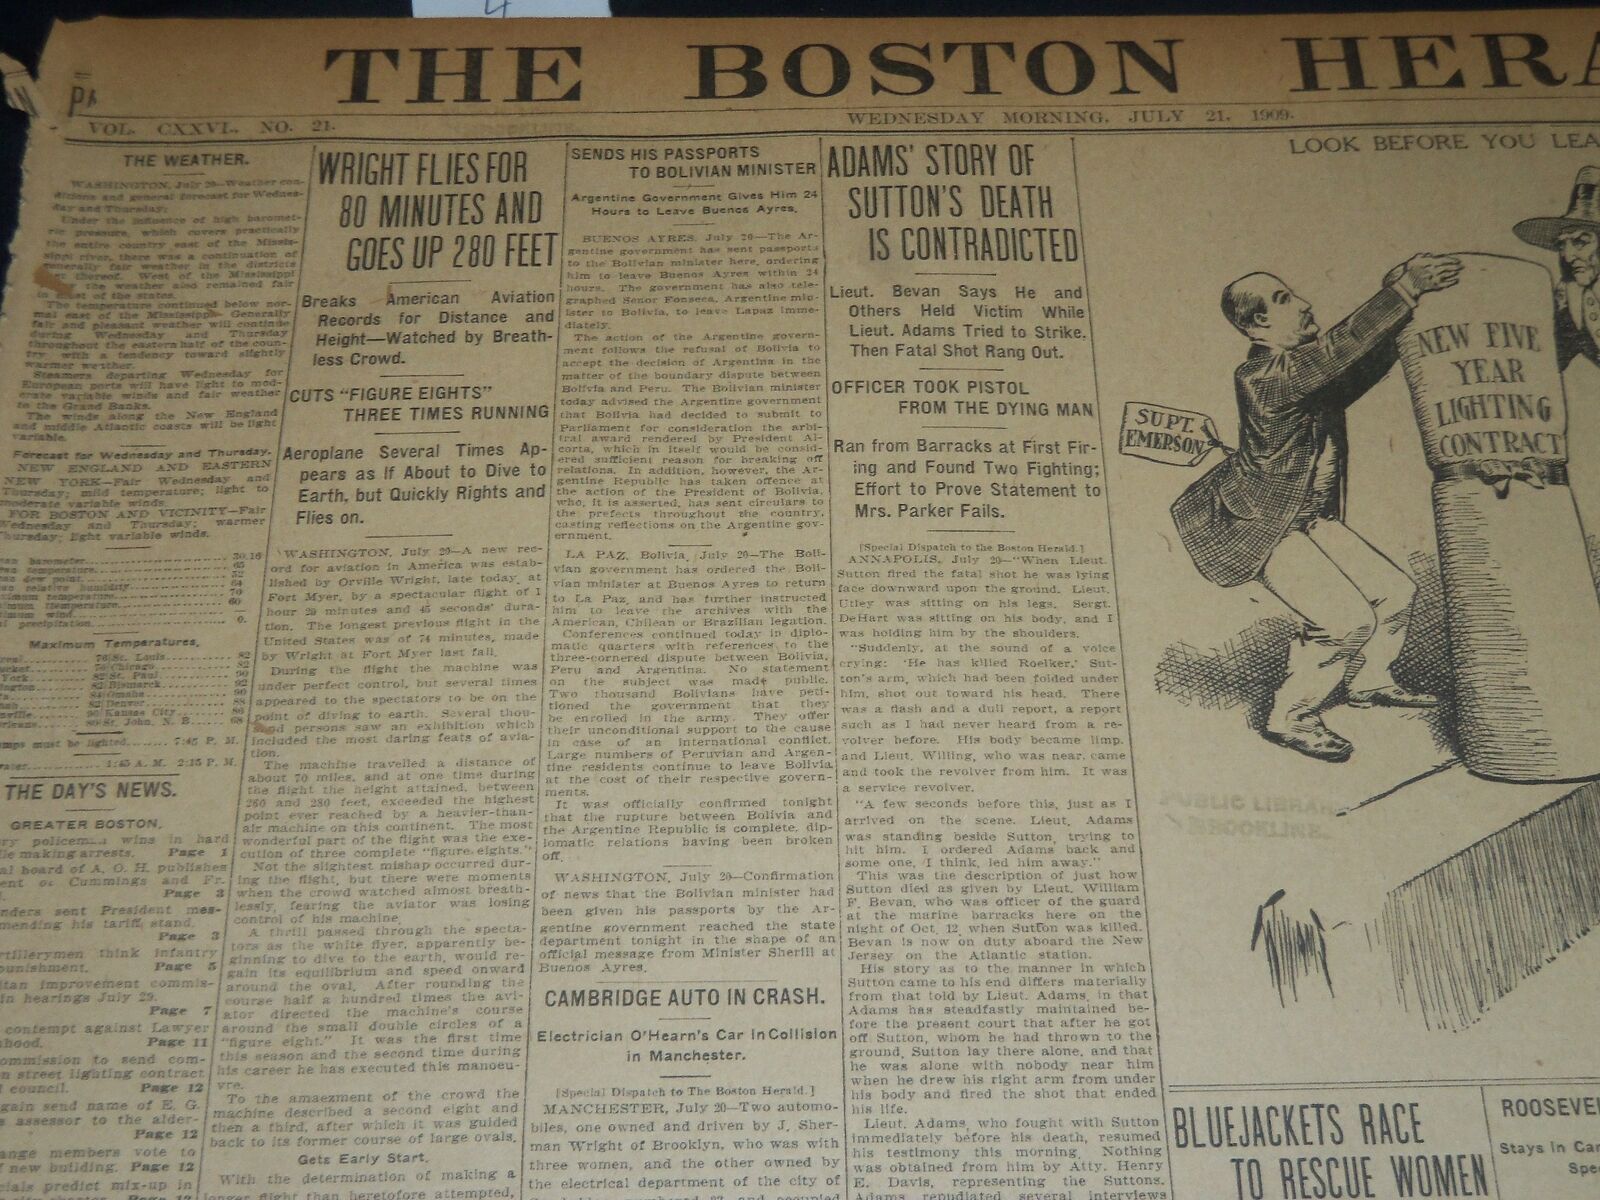 1909 JULY 21 THE BOSTON HERALD - WRIGHT FLIES FOR 80 MIN, UP 280 FEET - BH 213